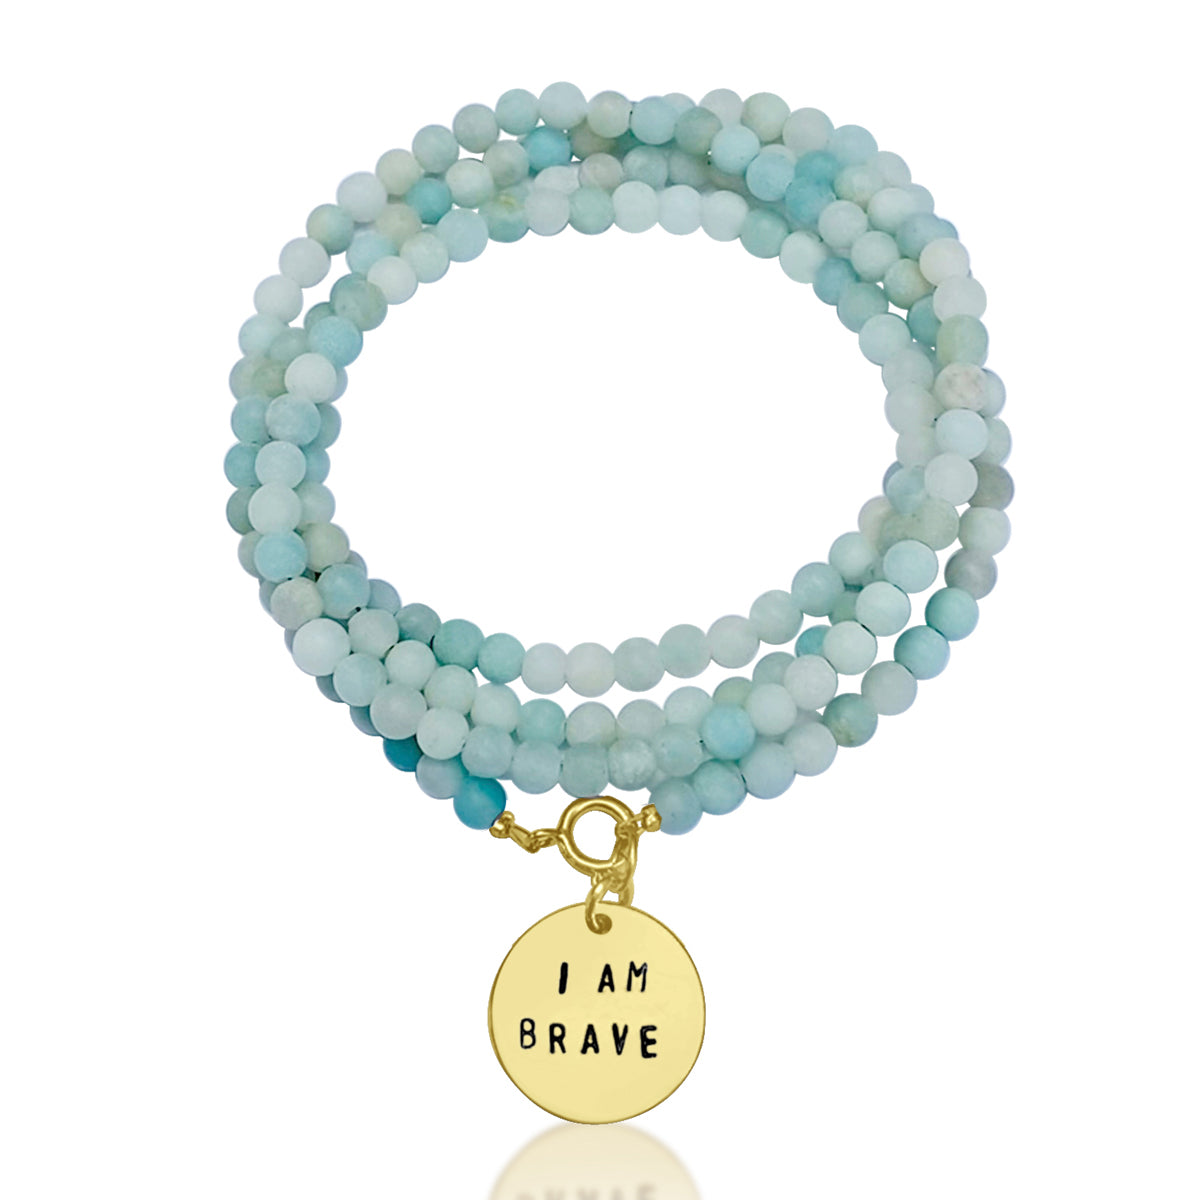 I am Brave Affirmation Bracelet with Amazonite for Courage. Repeat the "I am Brave" affirmation every morning during your routine! This will set the intention for the rest of your day (and perhaps life) - to travel into the unknown to try something new.